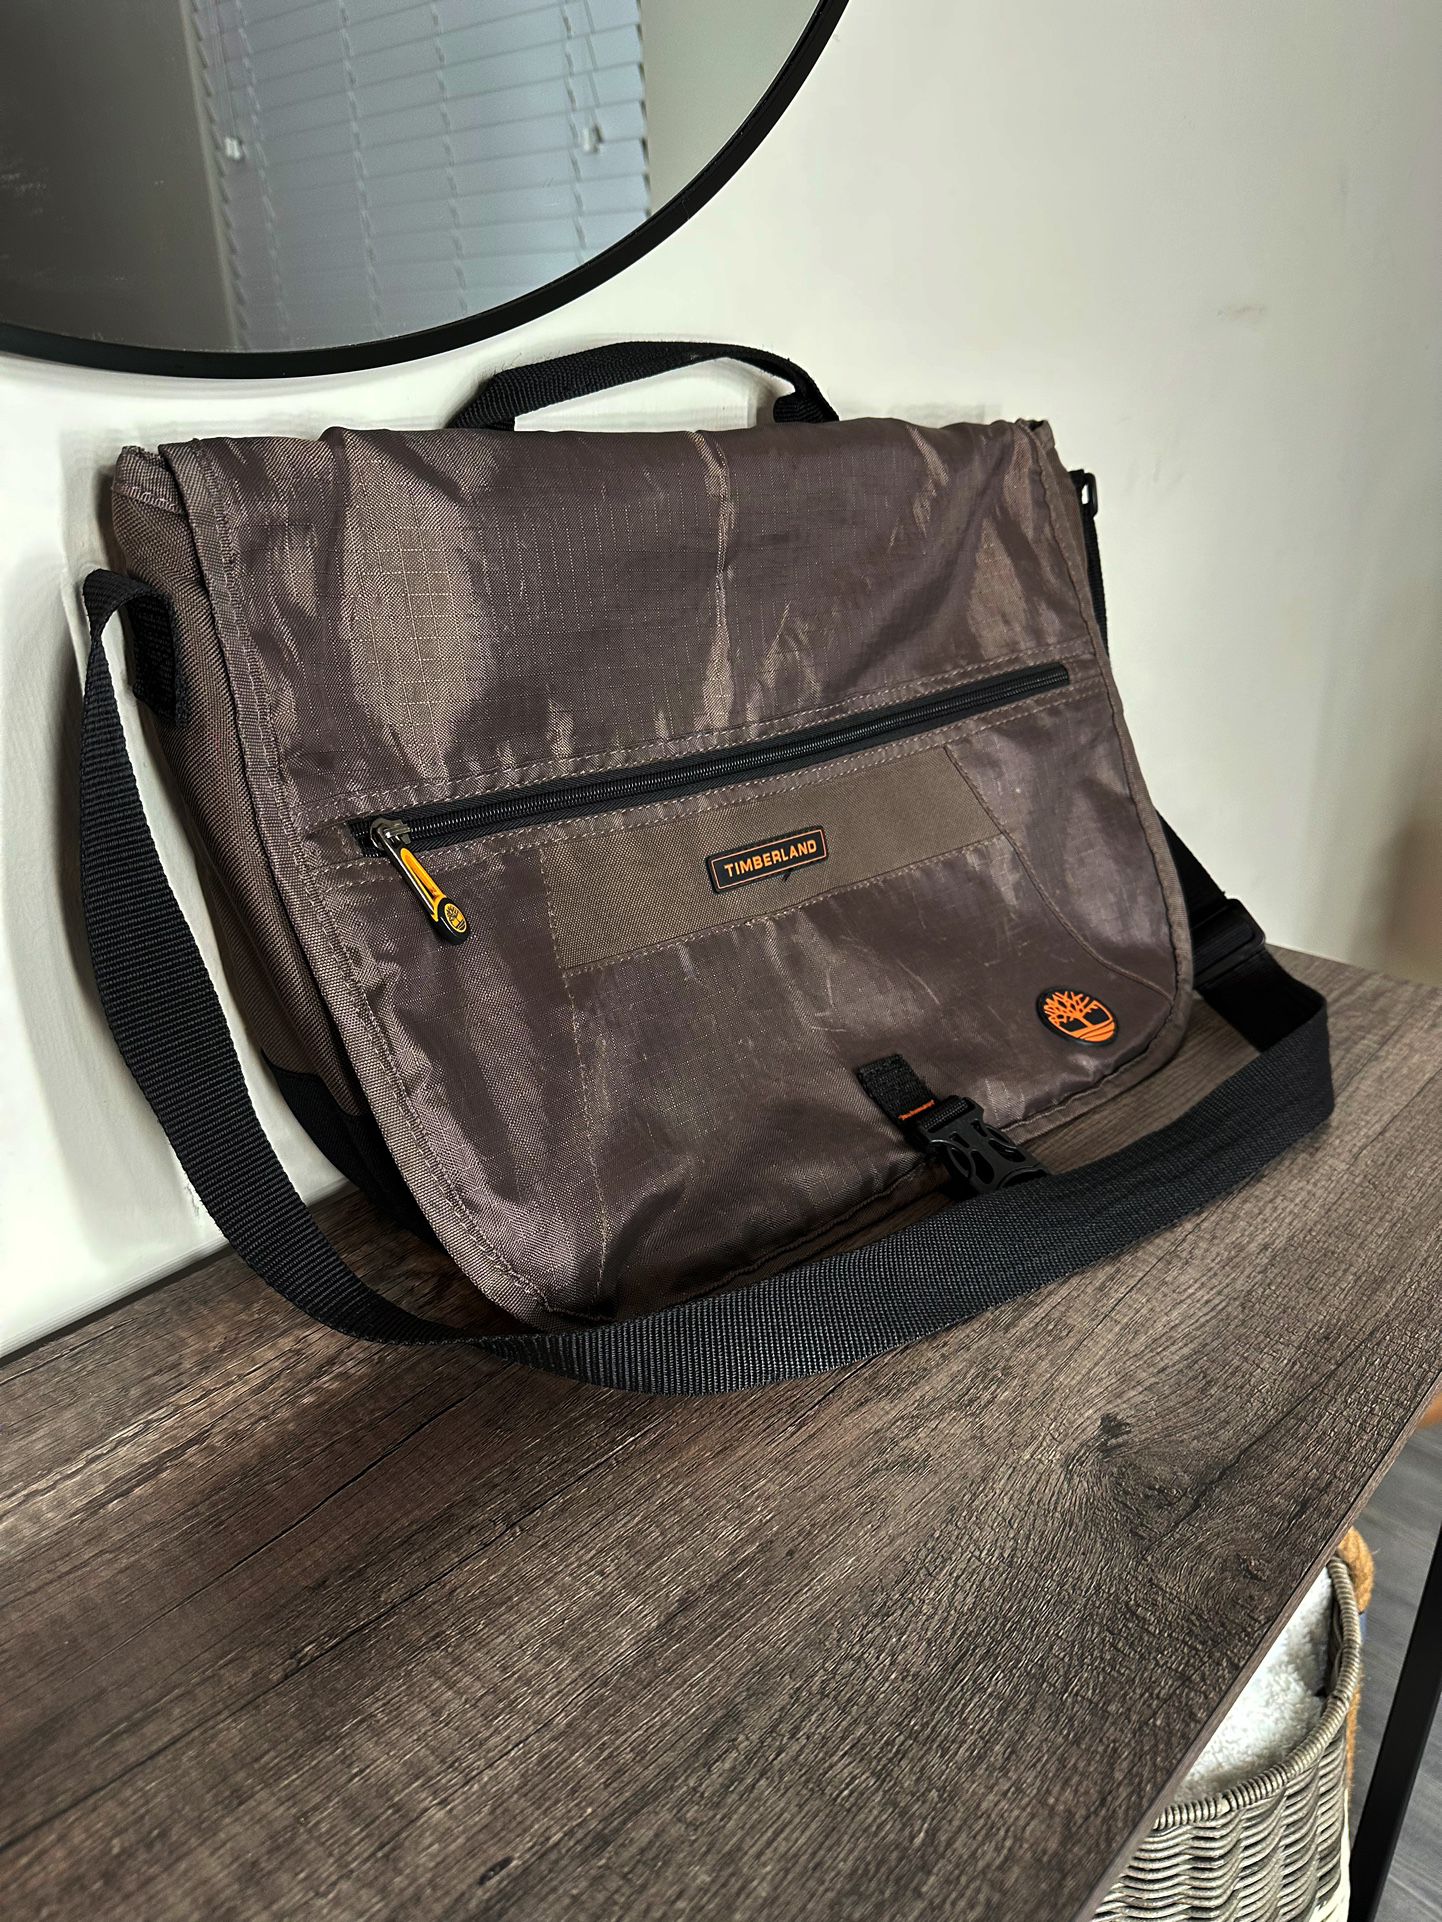 Timberland - Route 4 Messenger Bag